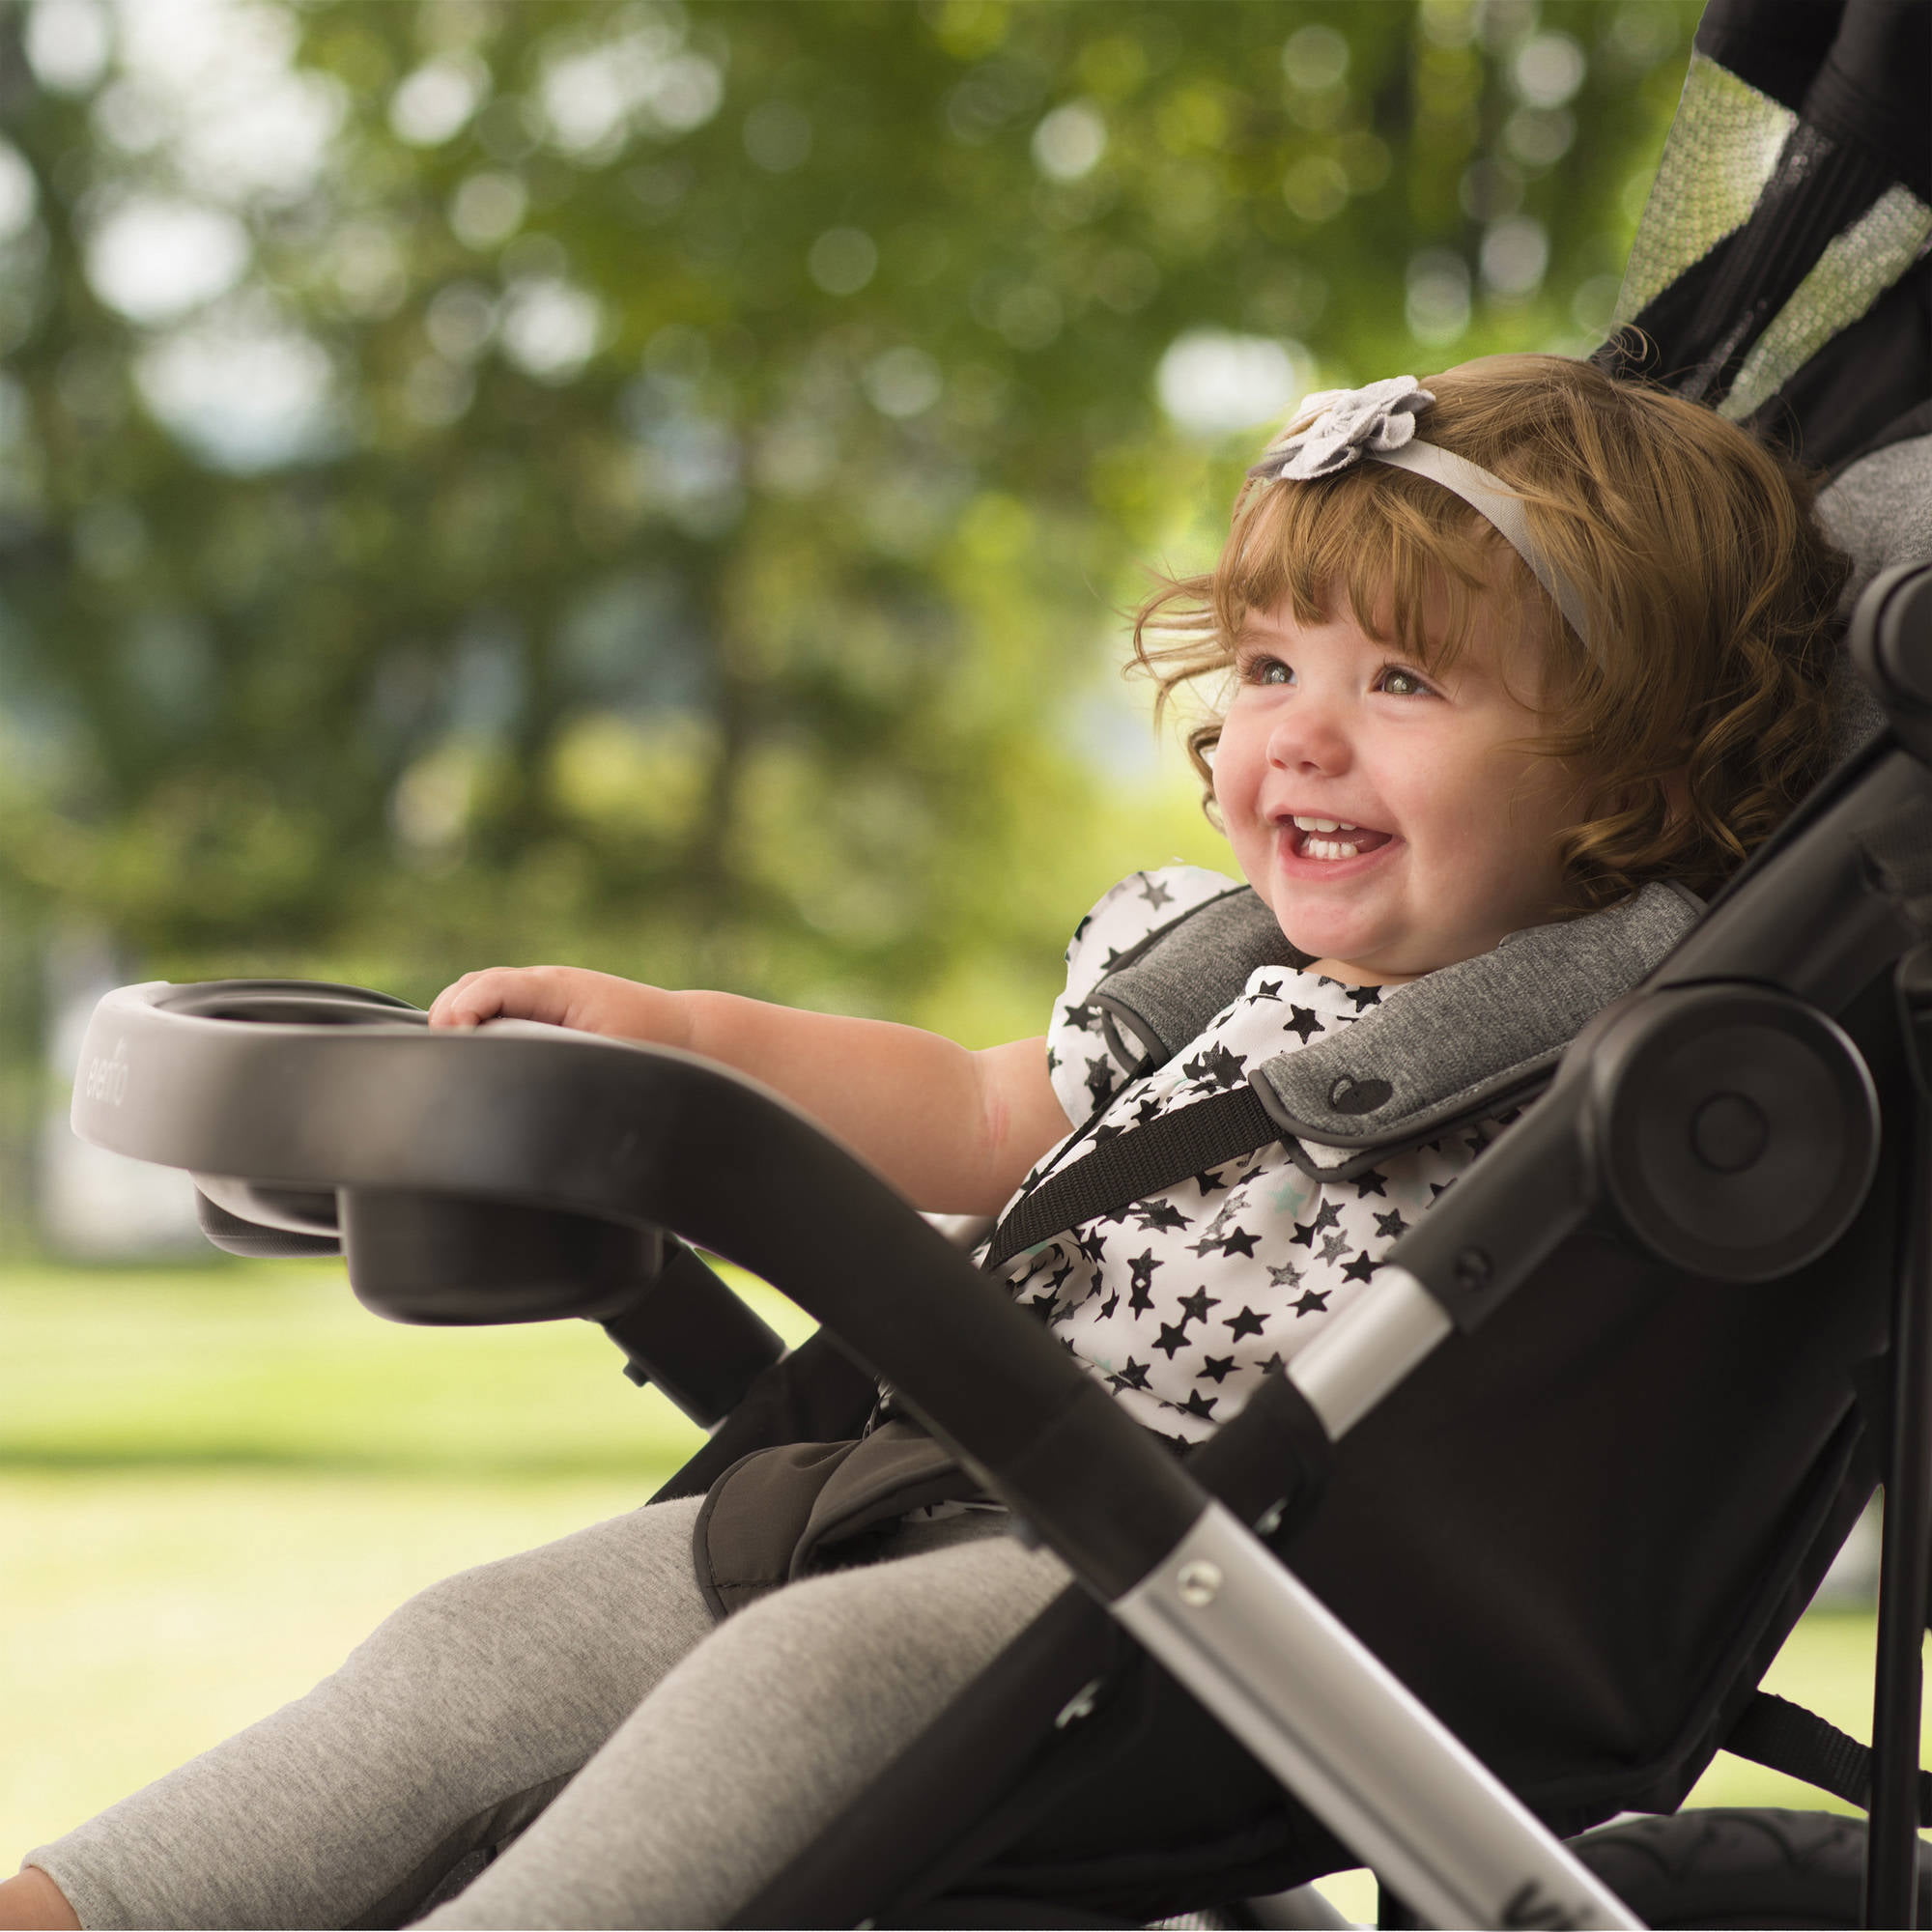 evenflo victory plus jogger travel system featuring the litemax infant car seat